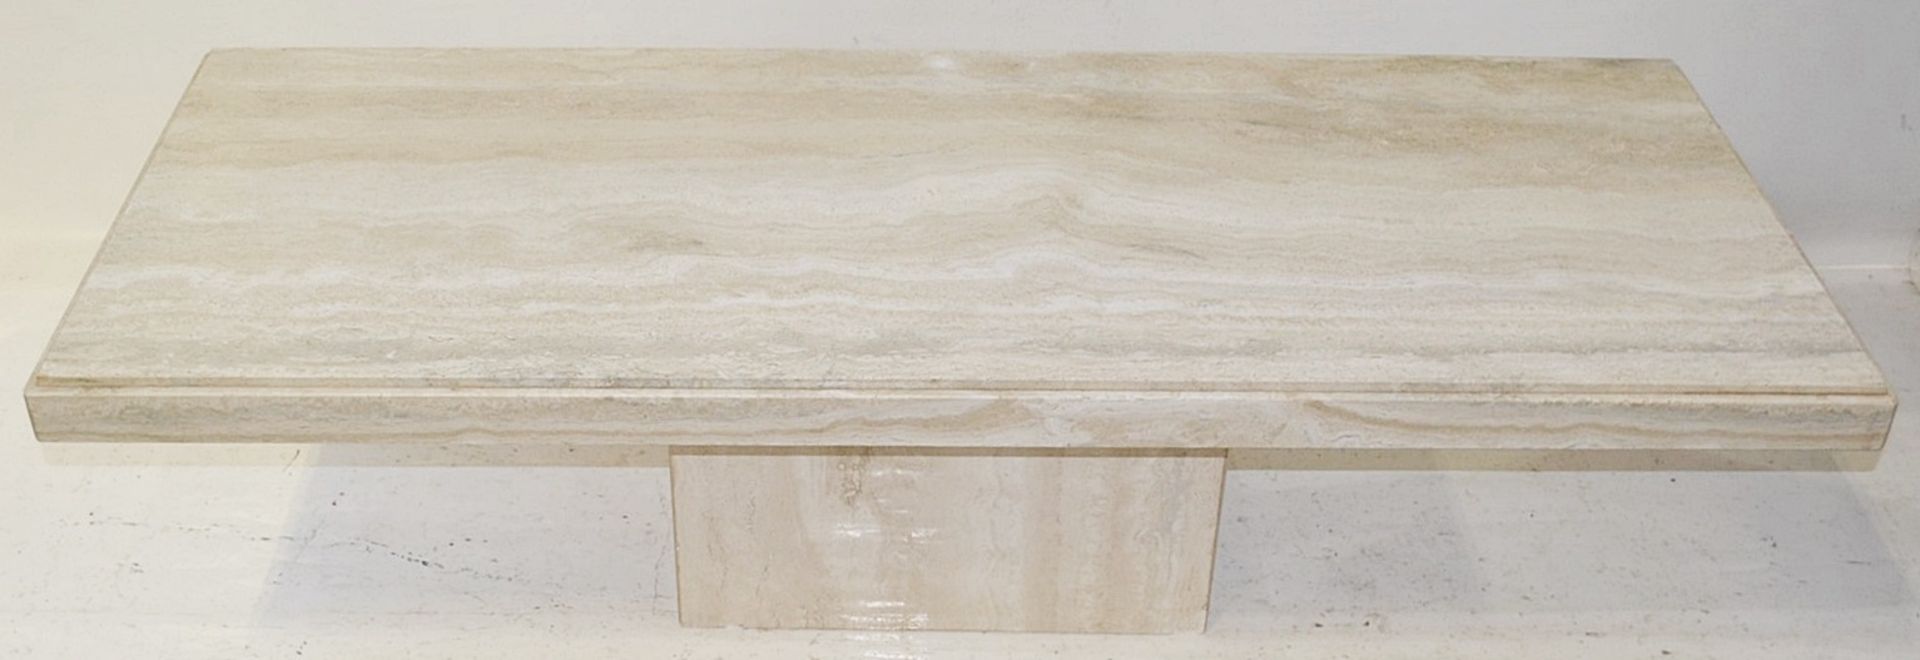 1 x STONE INTERNATIONAL Long Rectangular Italian Marble Table - Used, In Good Condition *No VAT* - Image 4 of 5